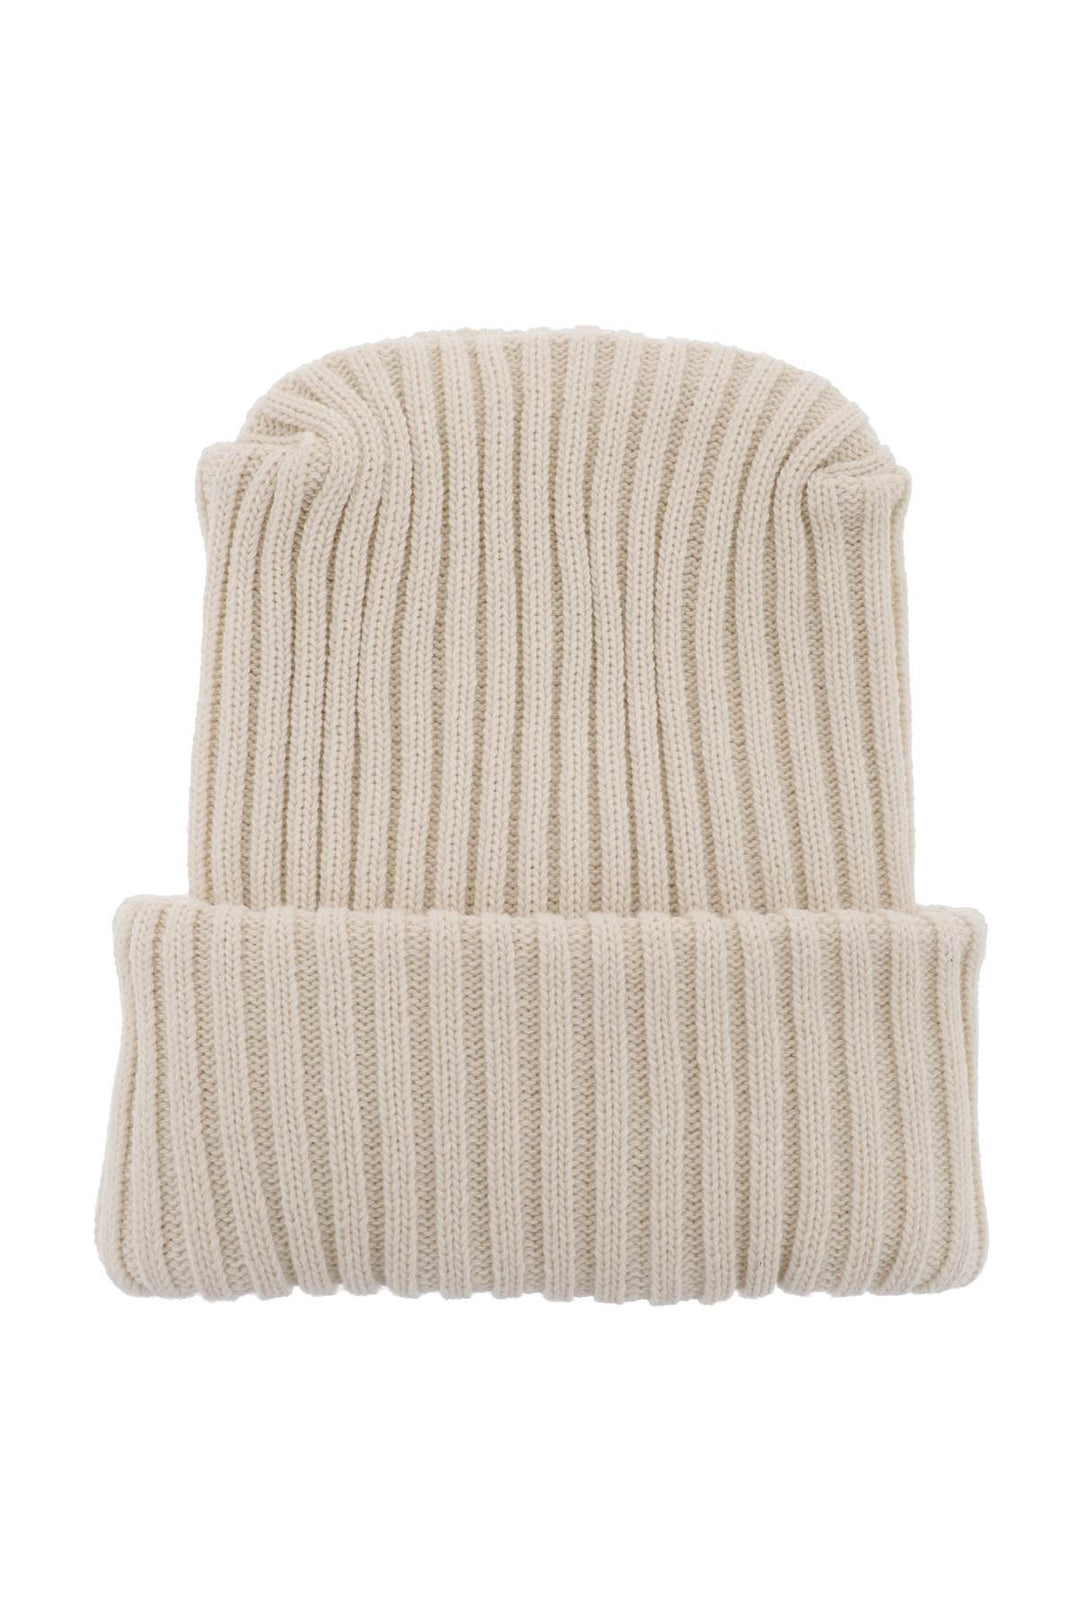 Cappello Beanie Tricot - Moncler X Roc Nation By Jay Z - Uomo